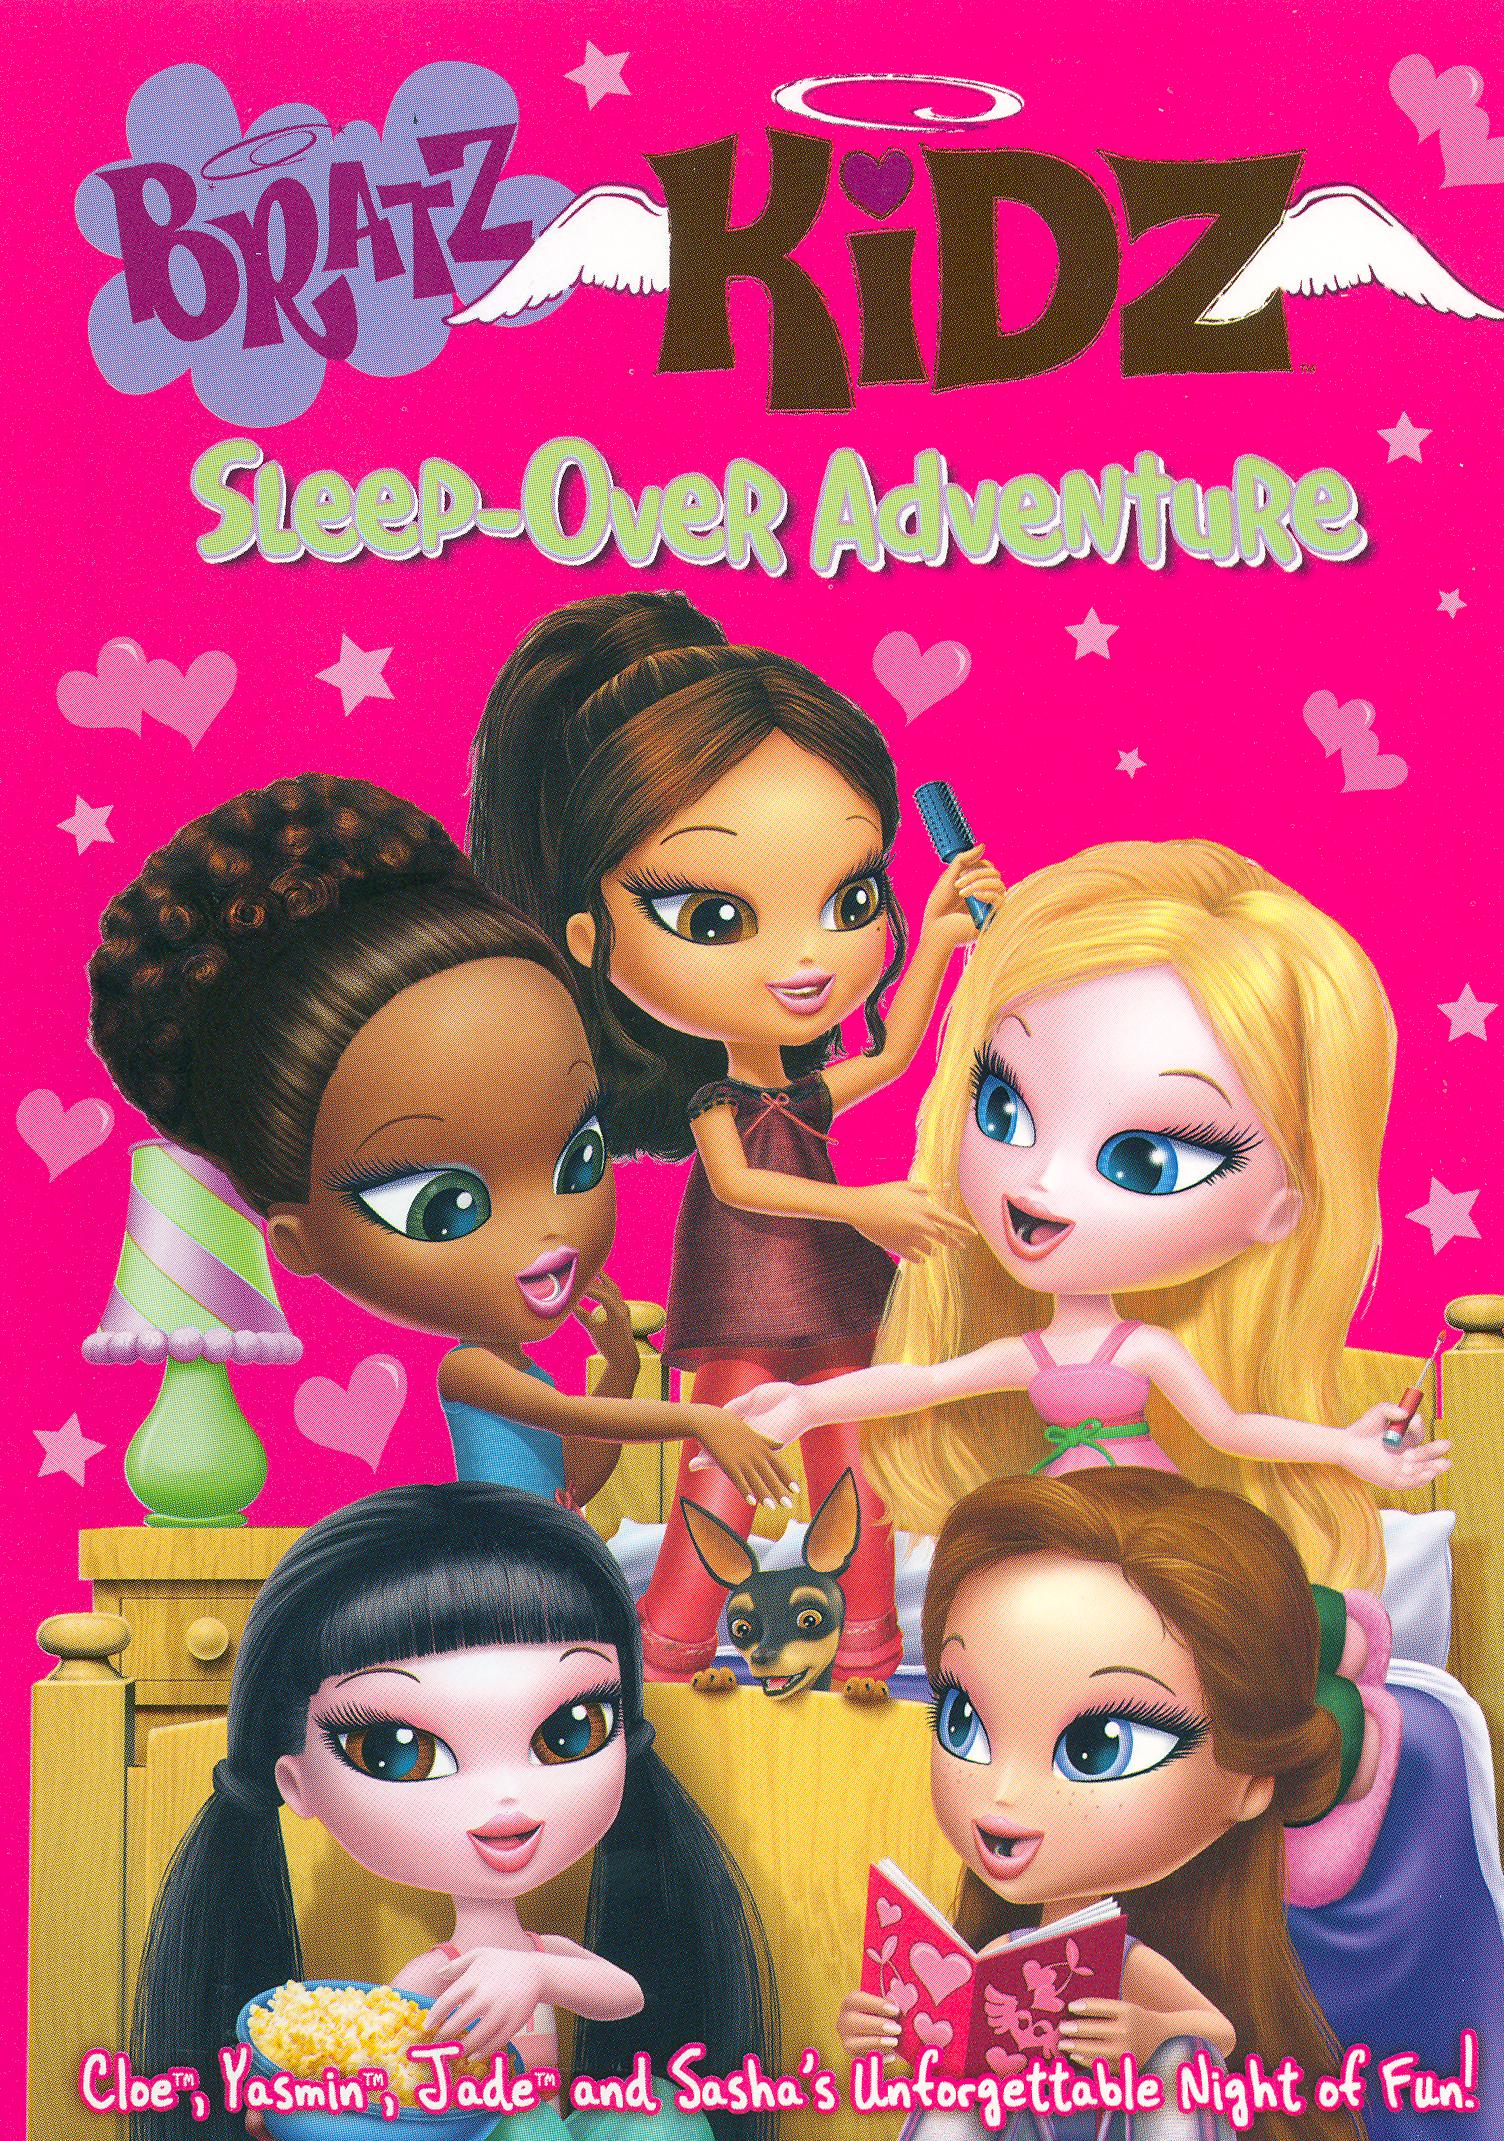 I just bought this really cheap, but cannot find it anywhere when I google Bratz  Sleepover Meygan - is it a knock off? : r/Bratz